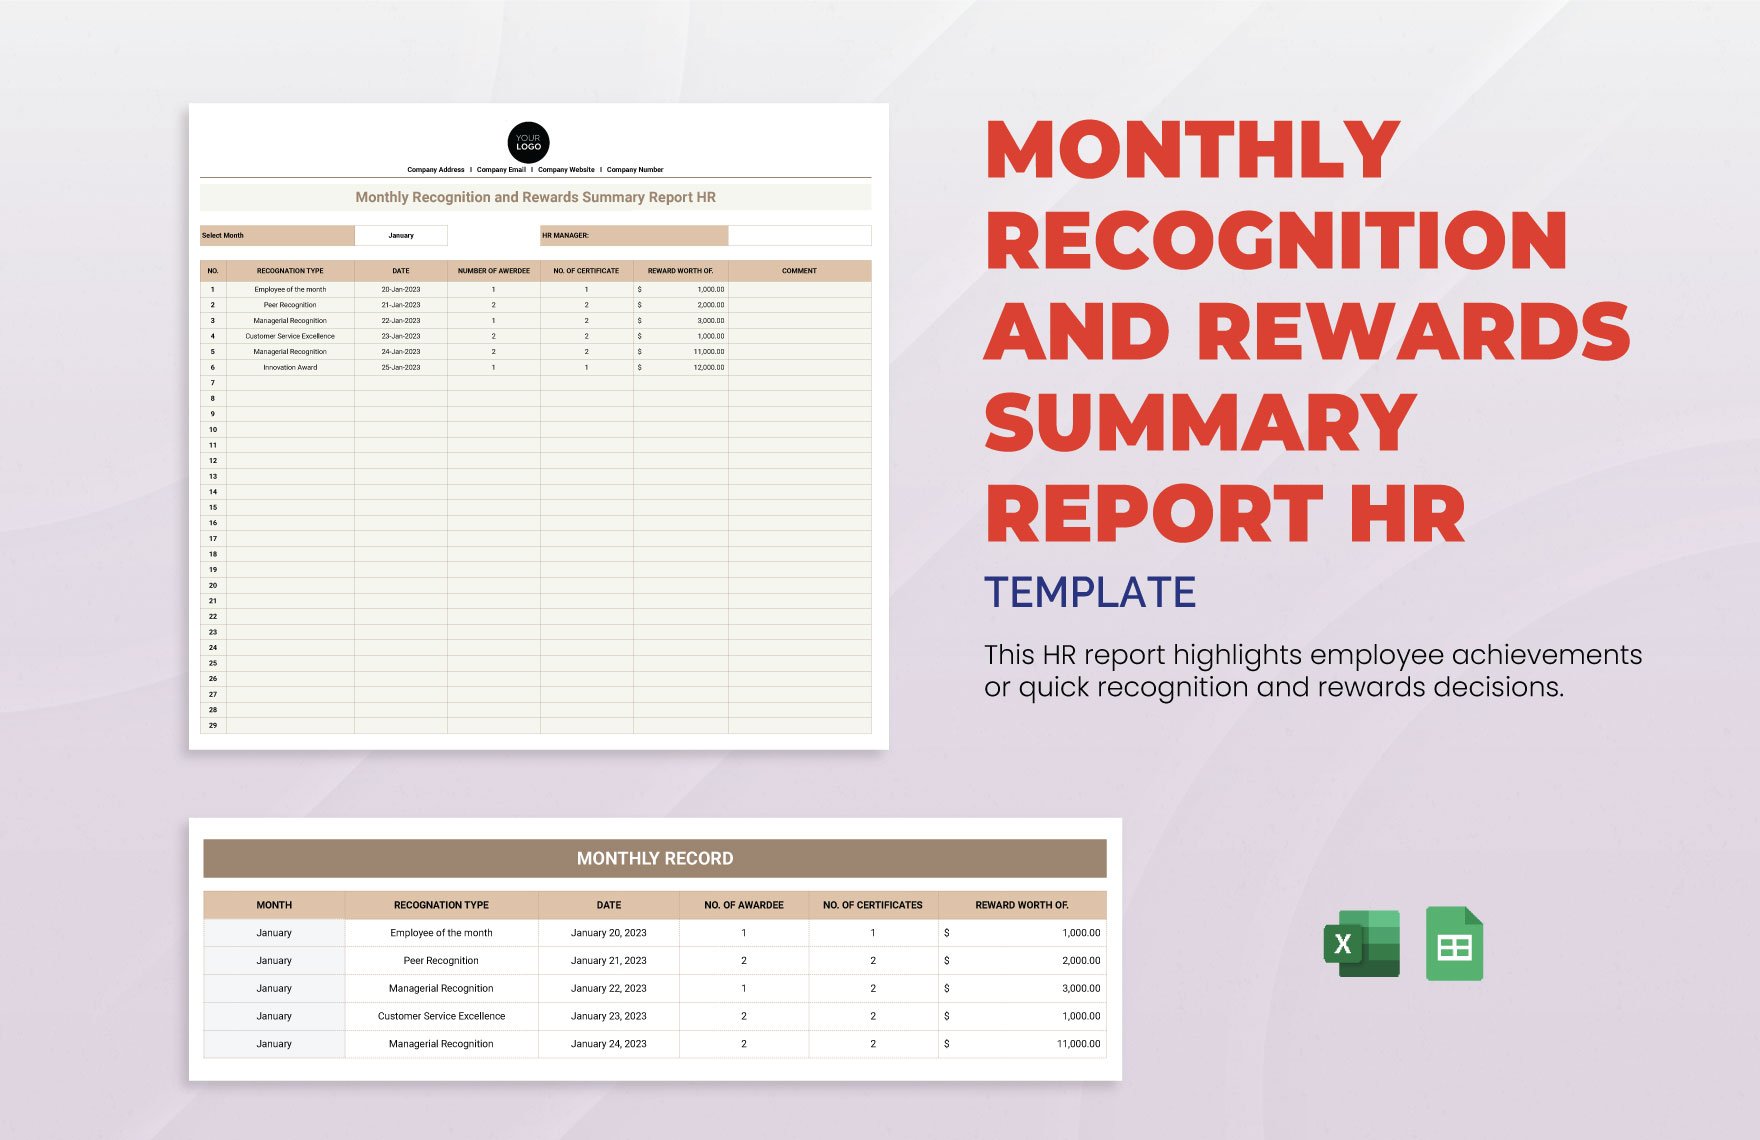 Monthly Recognition and Rewards Summary Report HR Template